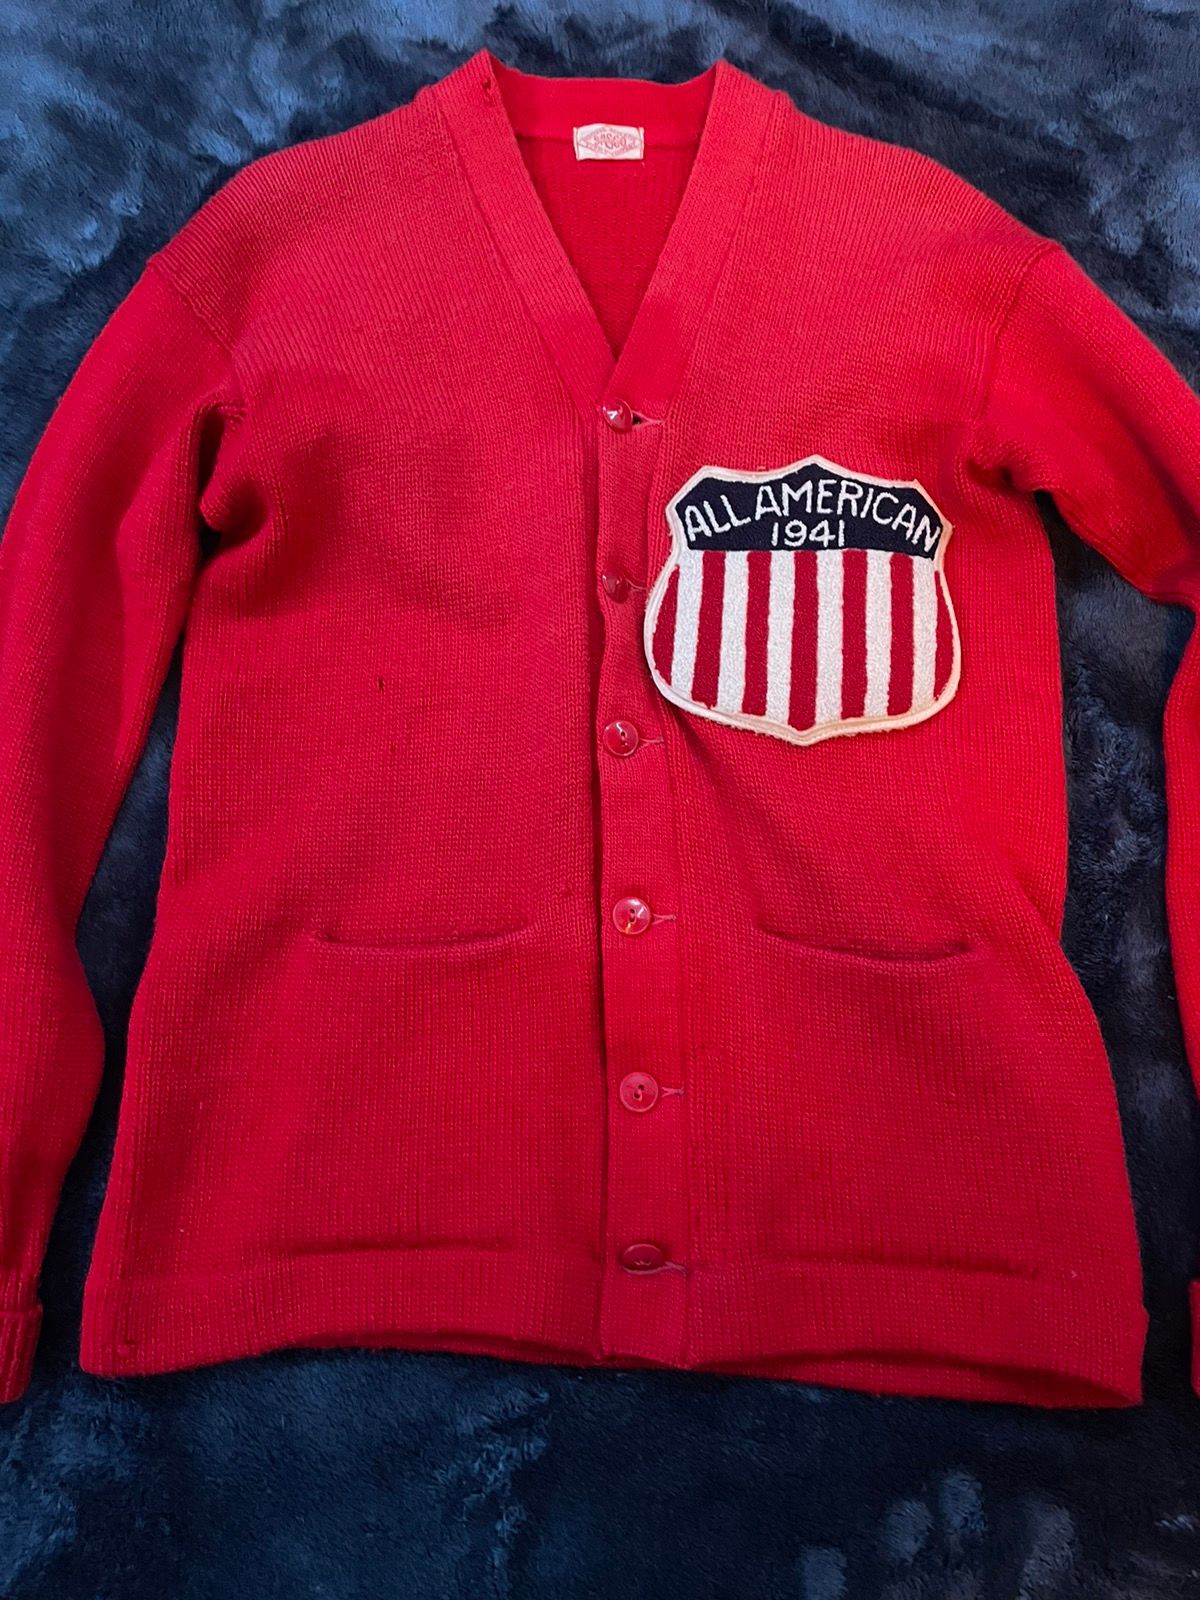 Vintage Vintage 1941 all American wool knit cardigan Size US L / EU 52-54 / 3 - 1 Preview